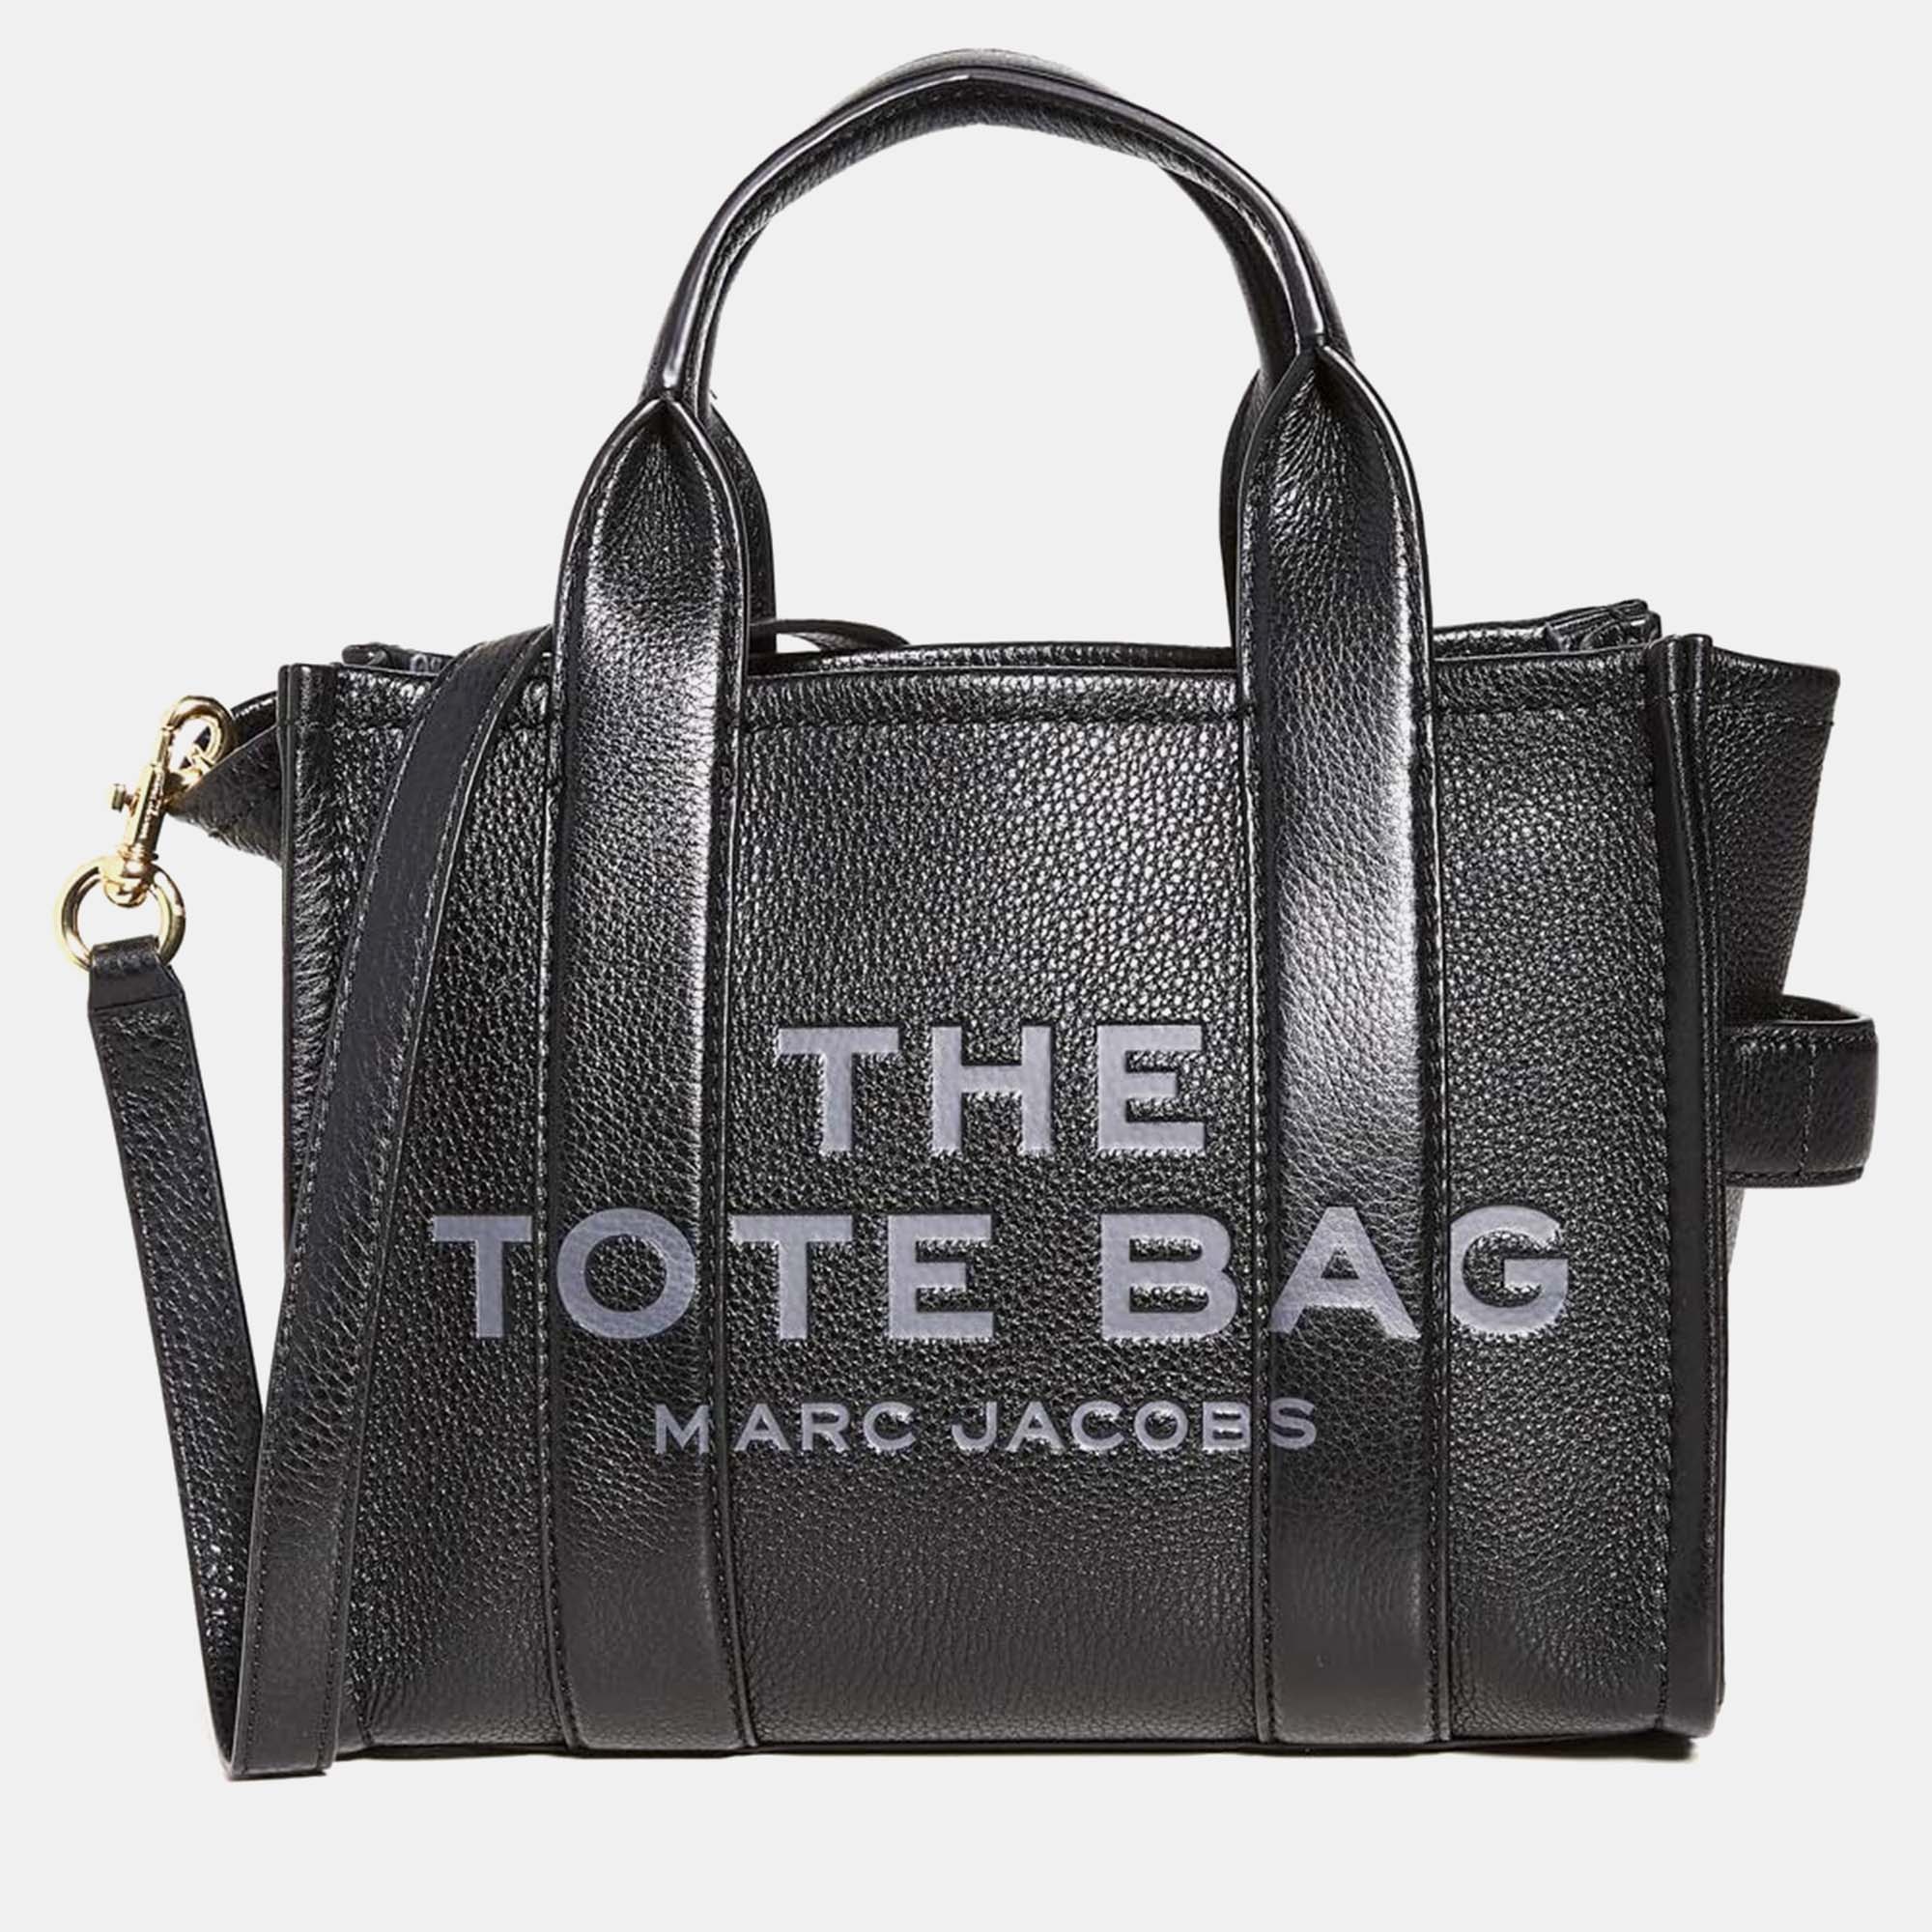 Marc jacobs black leather women's the leather mini tote bag